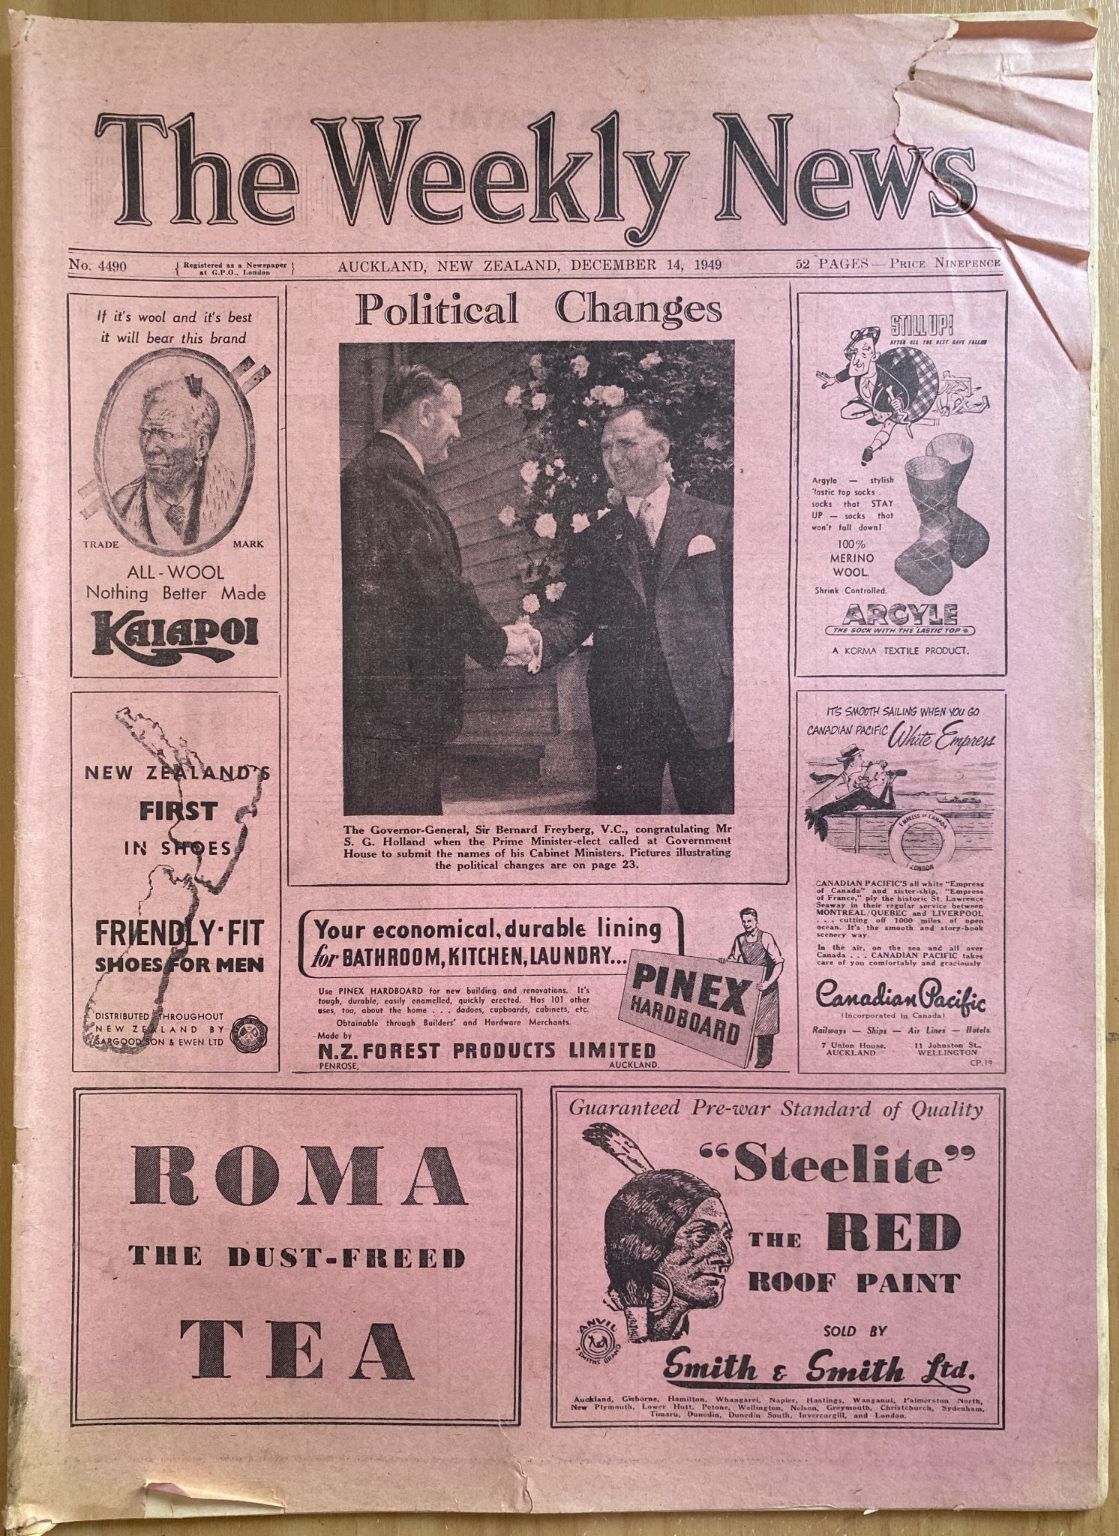 OLD NEWSPAPER: The Weekly News, No. 4490, 14 December 1949